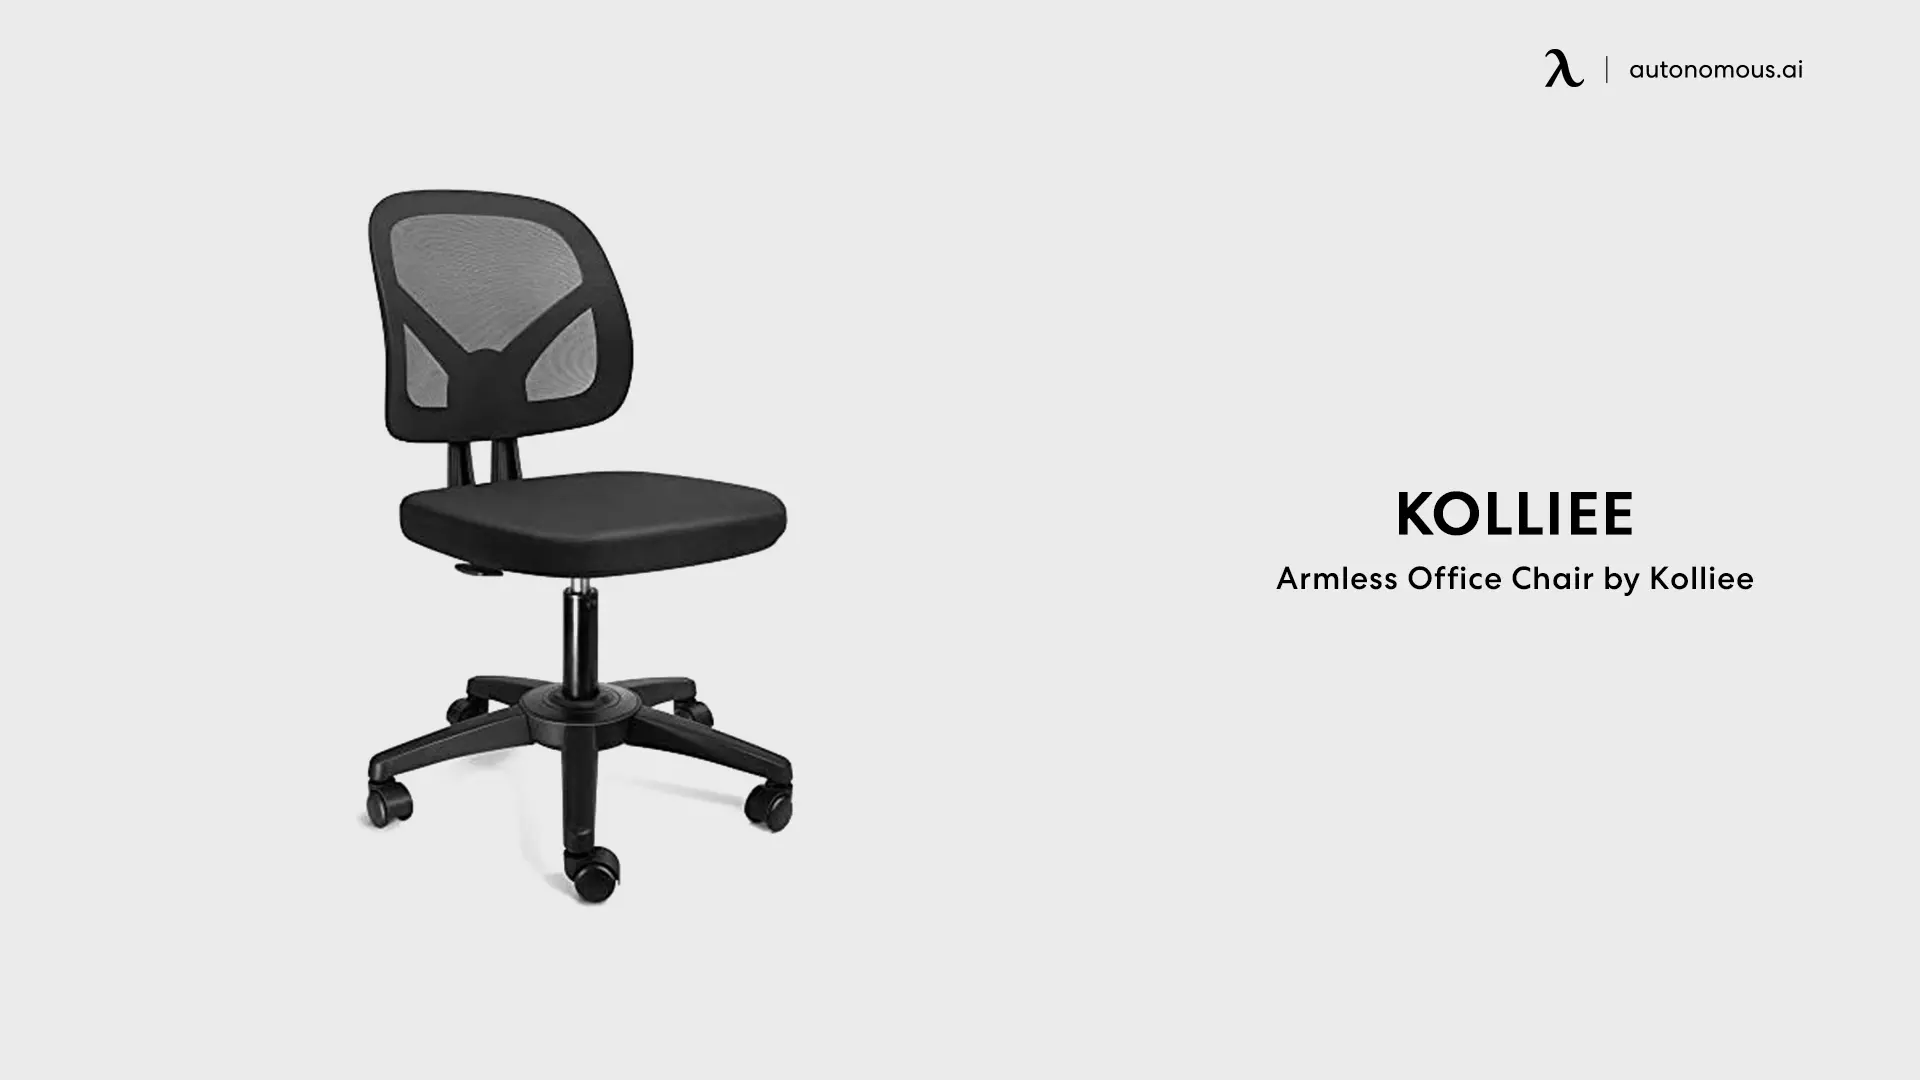 Armless Office Chair by Kolliee